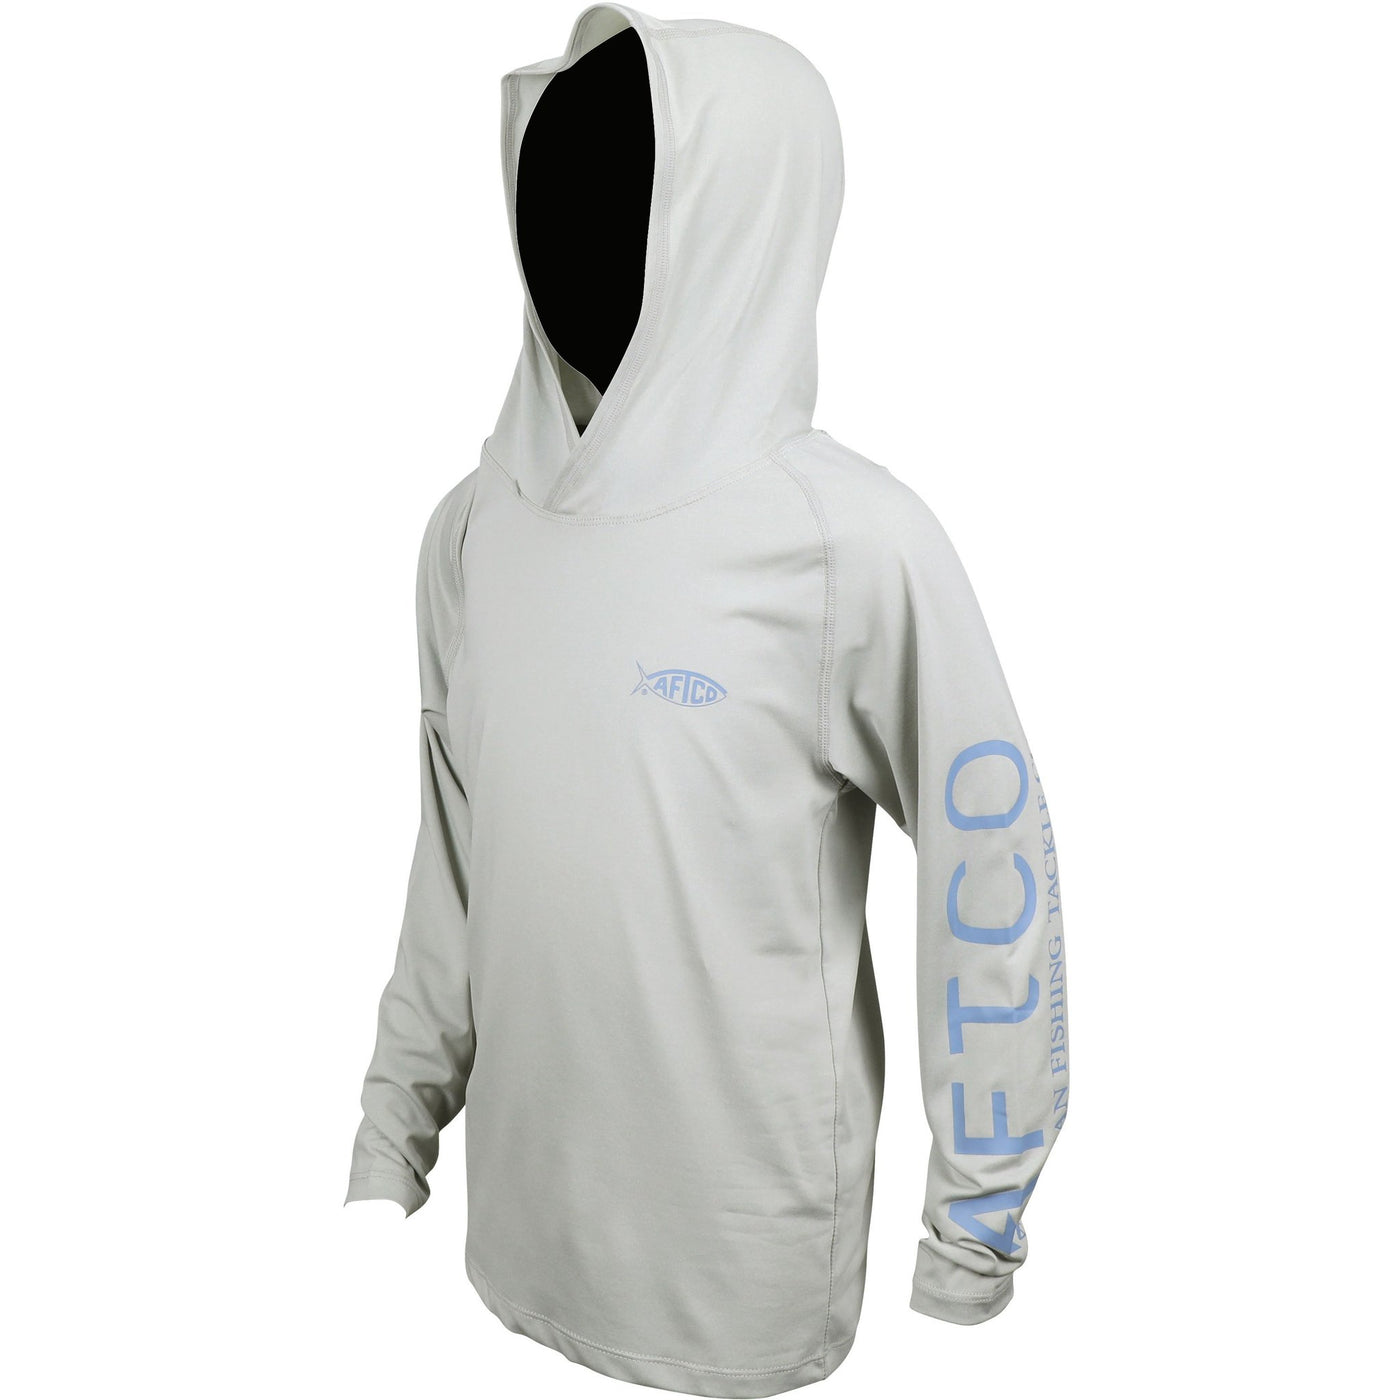 AFTCO Youth Samurai Performance Hoodie-CHILDRENS CLOTHING-Silver Heather-S-Kevin's Fine Outdoor Gear & Apparel